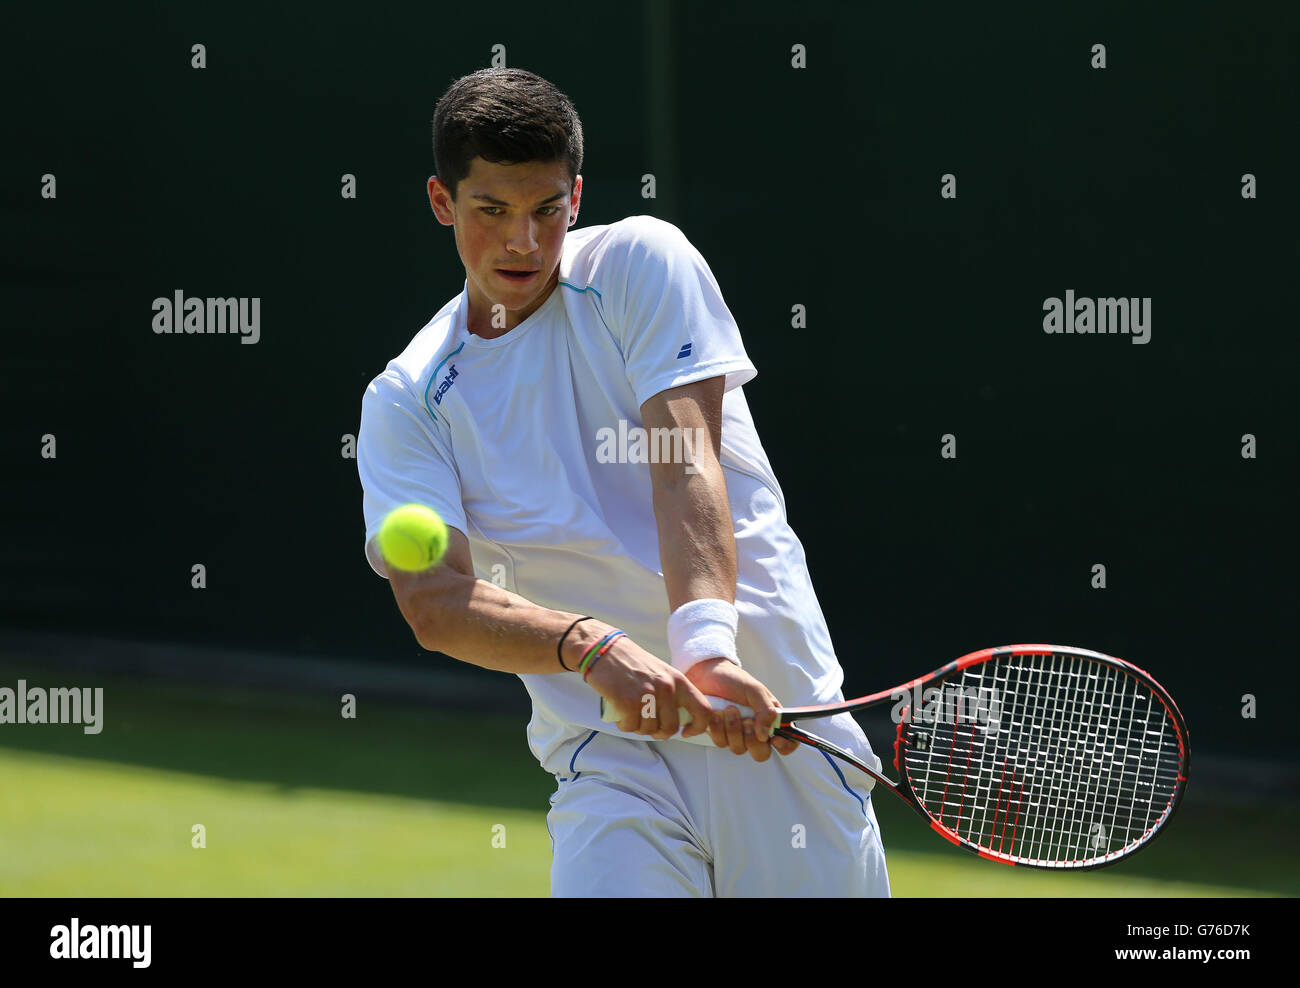 Great Britains Julian Cash in his Boys Singles match against USAs Taylor Harry Fitz during day nine of the Wimbledon Championships at the All England Lawn Tennis and Croquet Club, Wimbledon Stock